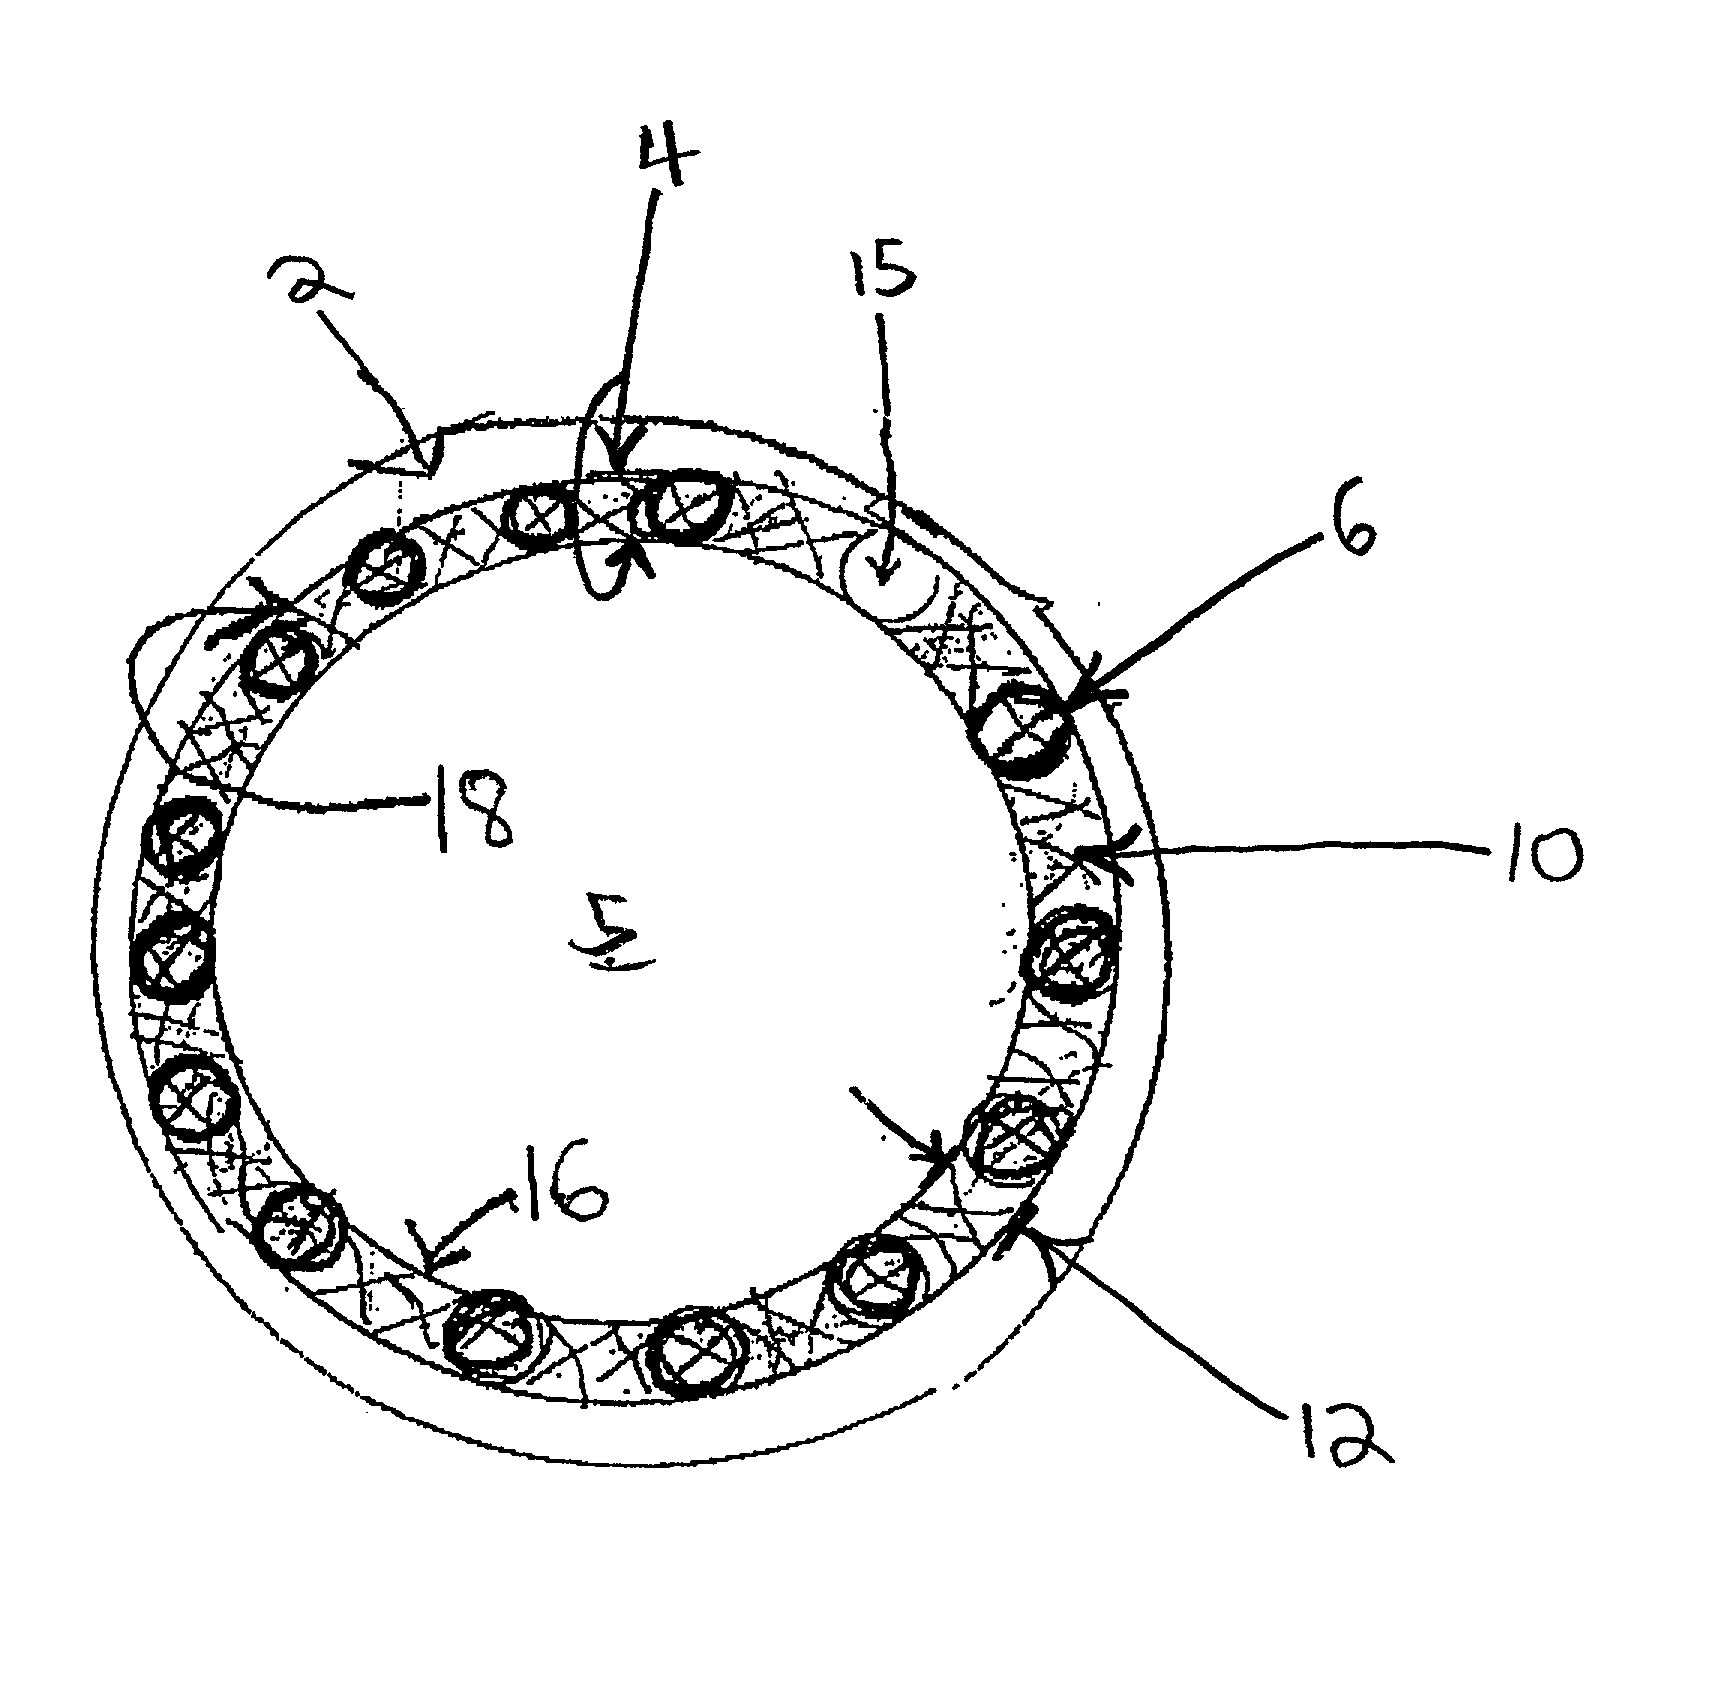 Method and apparatus for lining a conduit